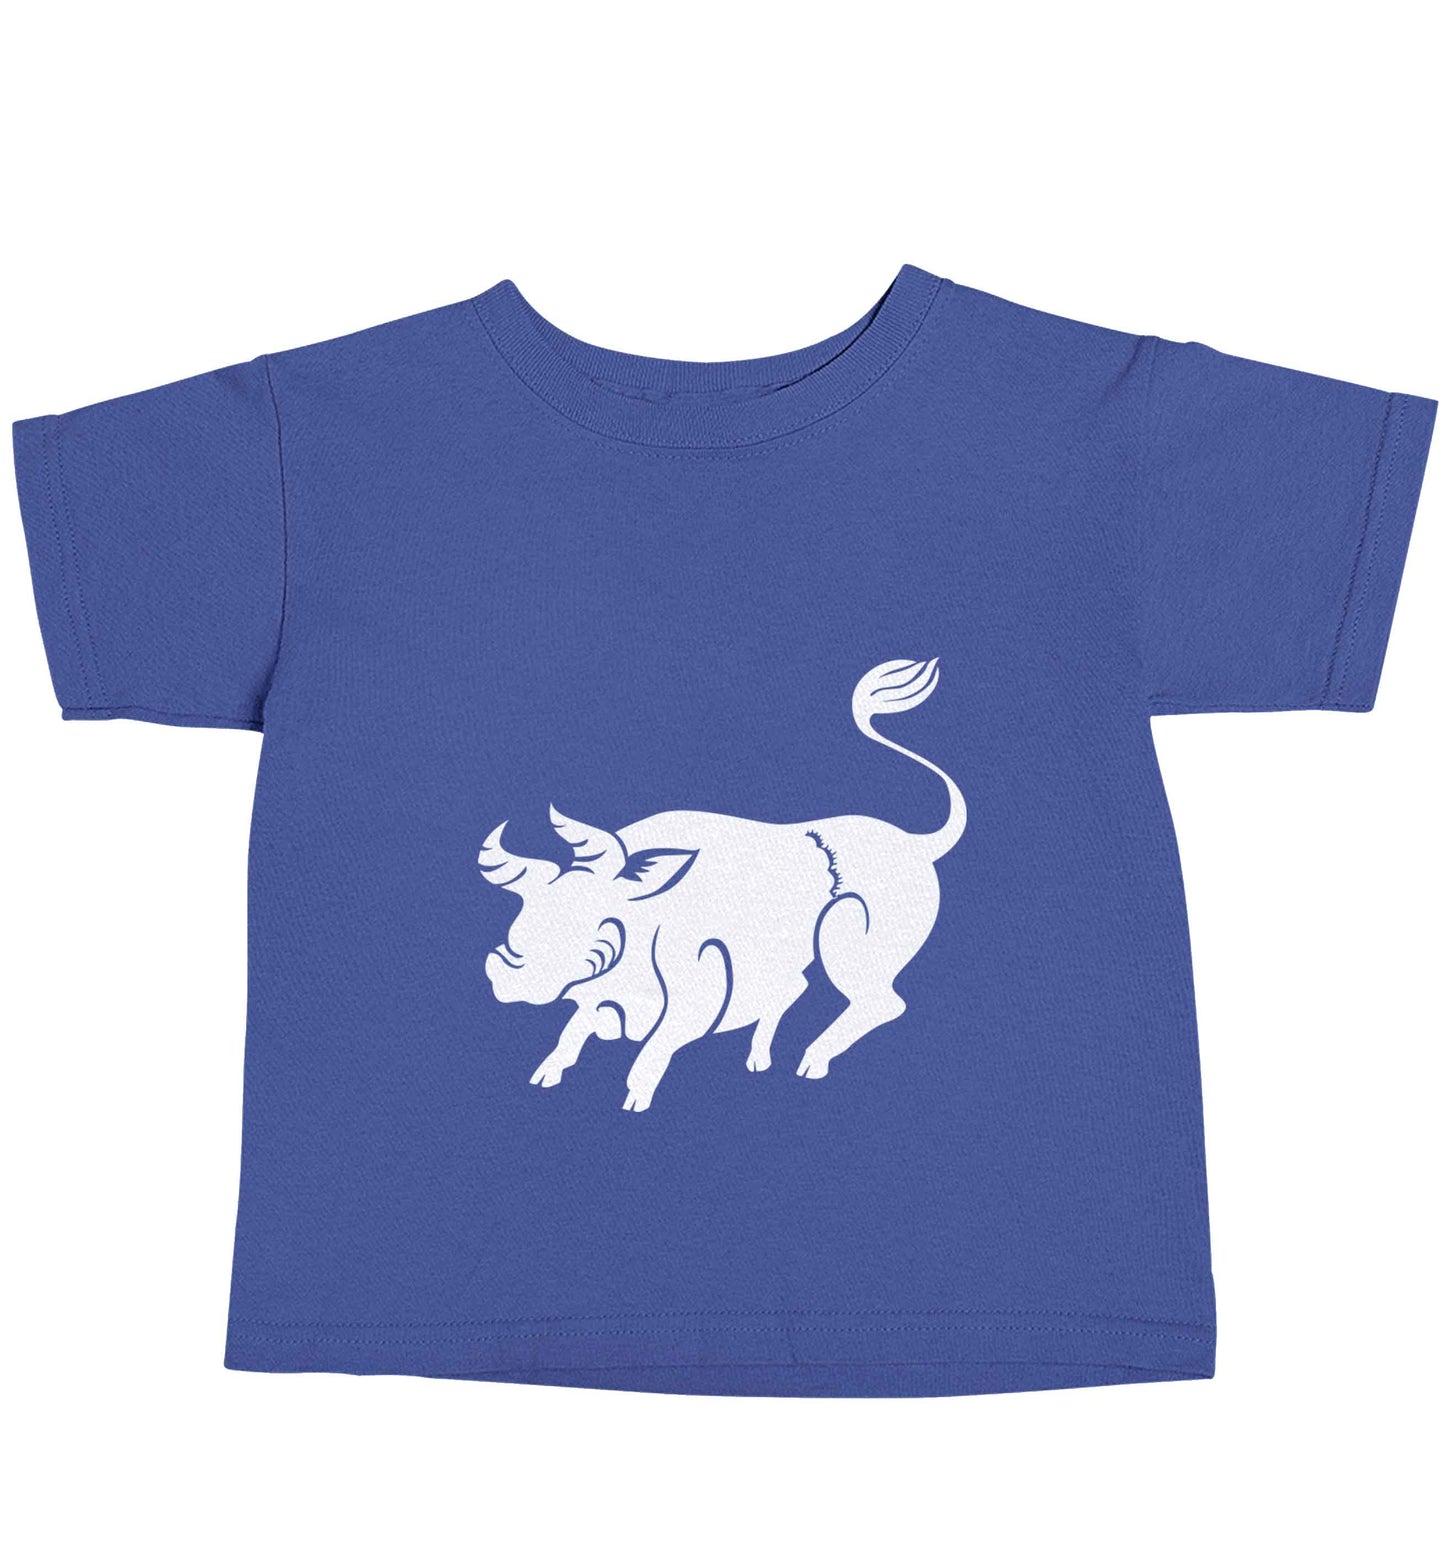 Blue ox blue baby toddler Tshirt 2 Years